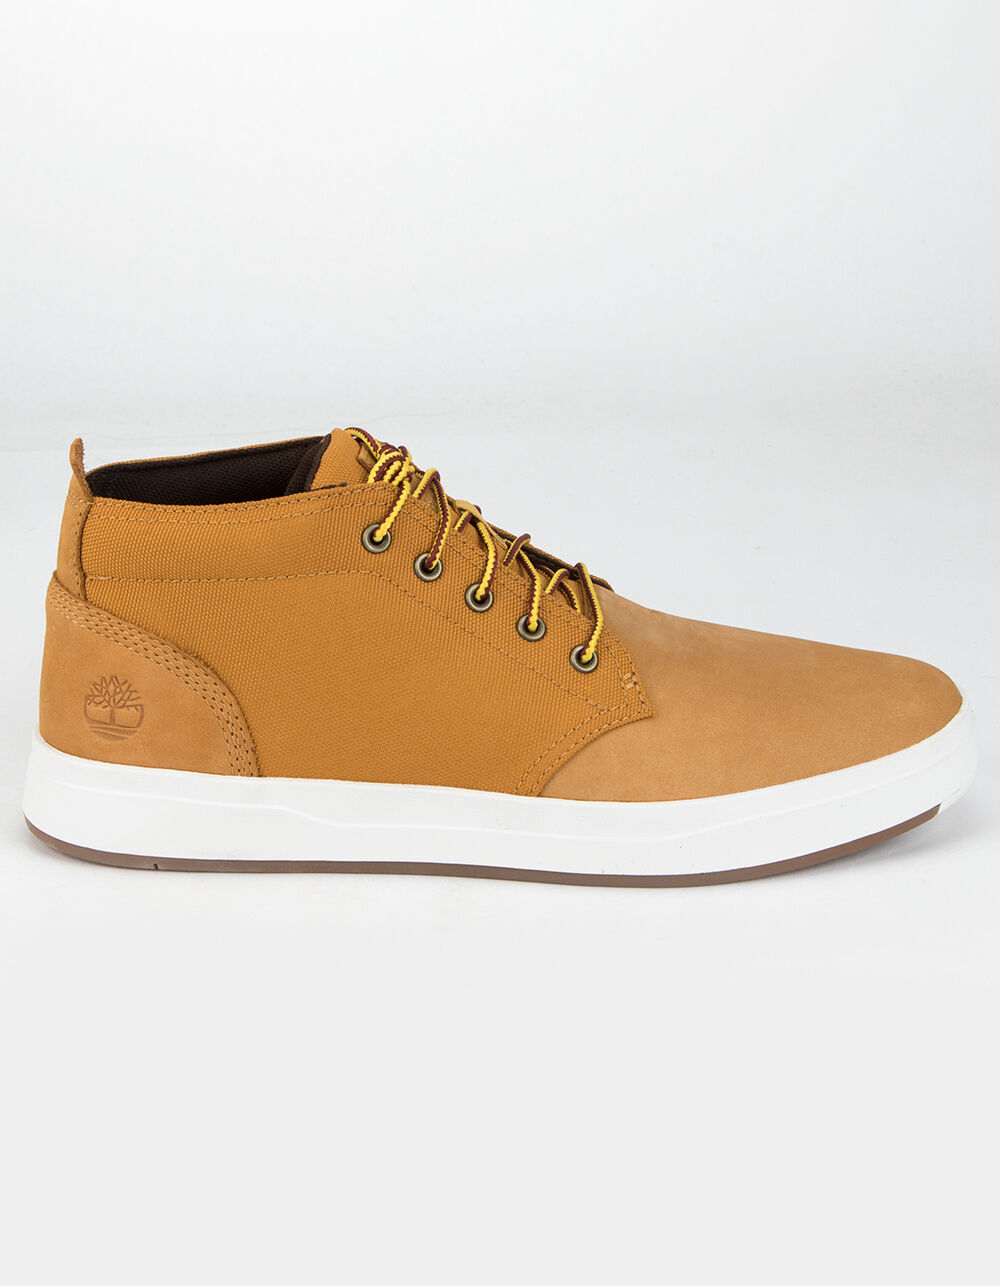 Wafel Iets Dragende cirkel TIMBERLAND Davis Square Leather Chukka Mens Shoes - WHEAT | Tillys